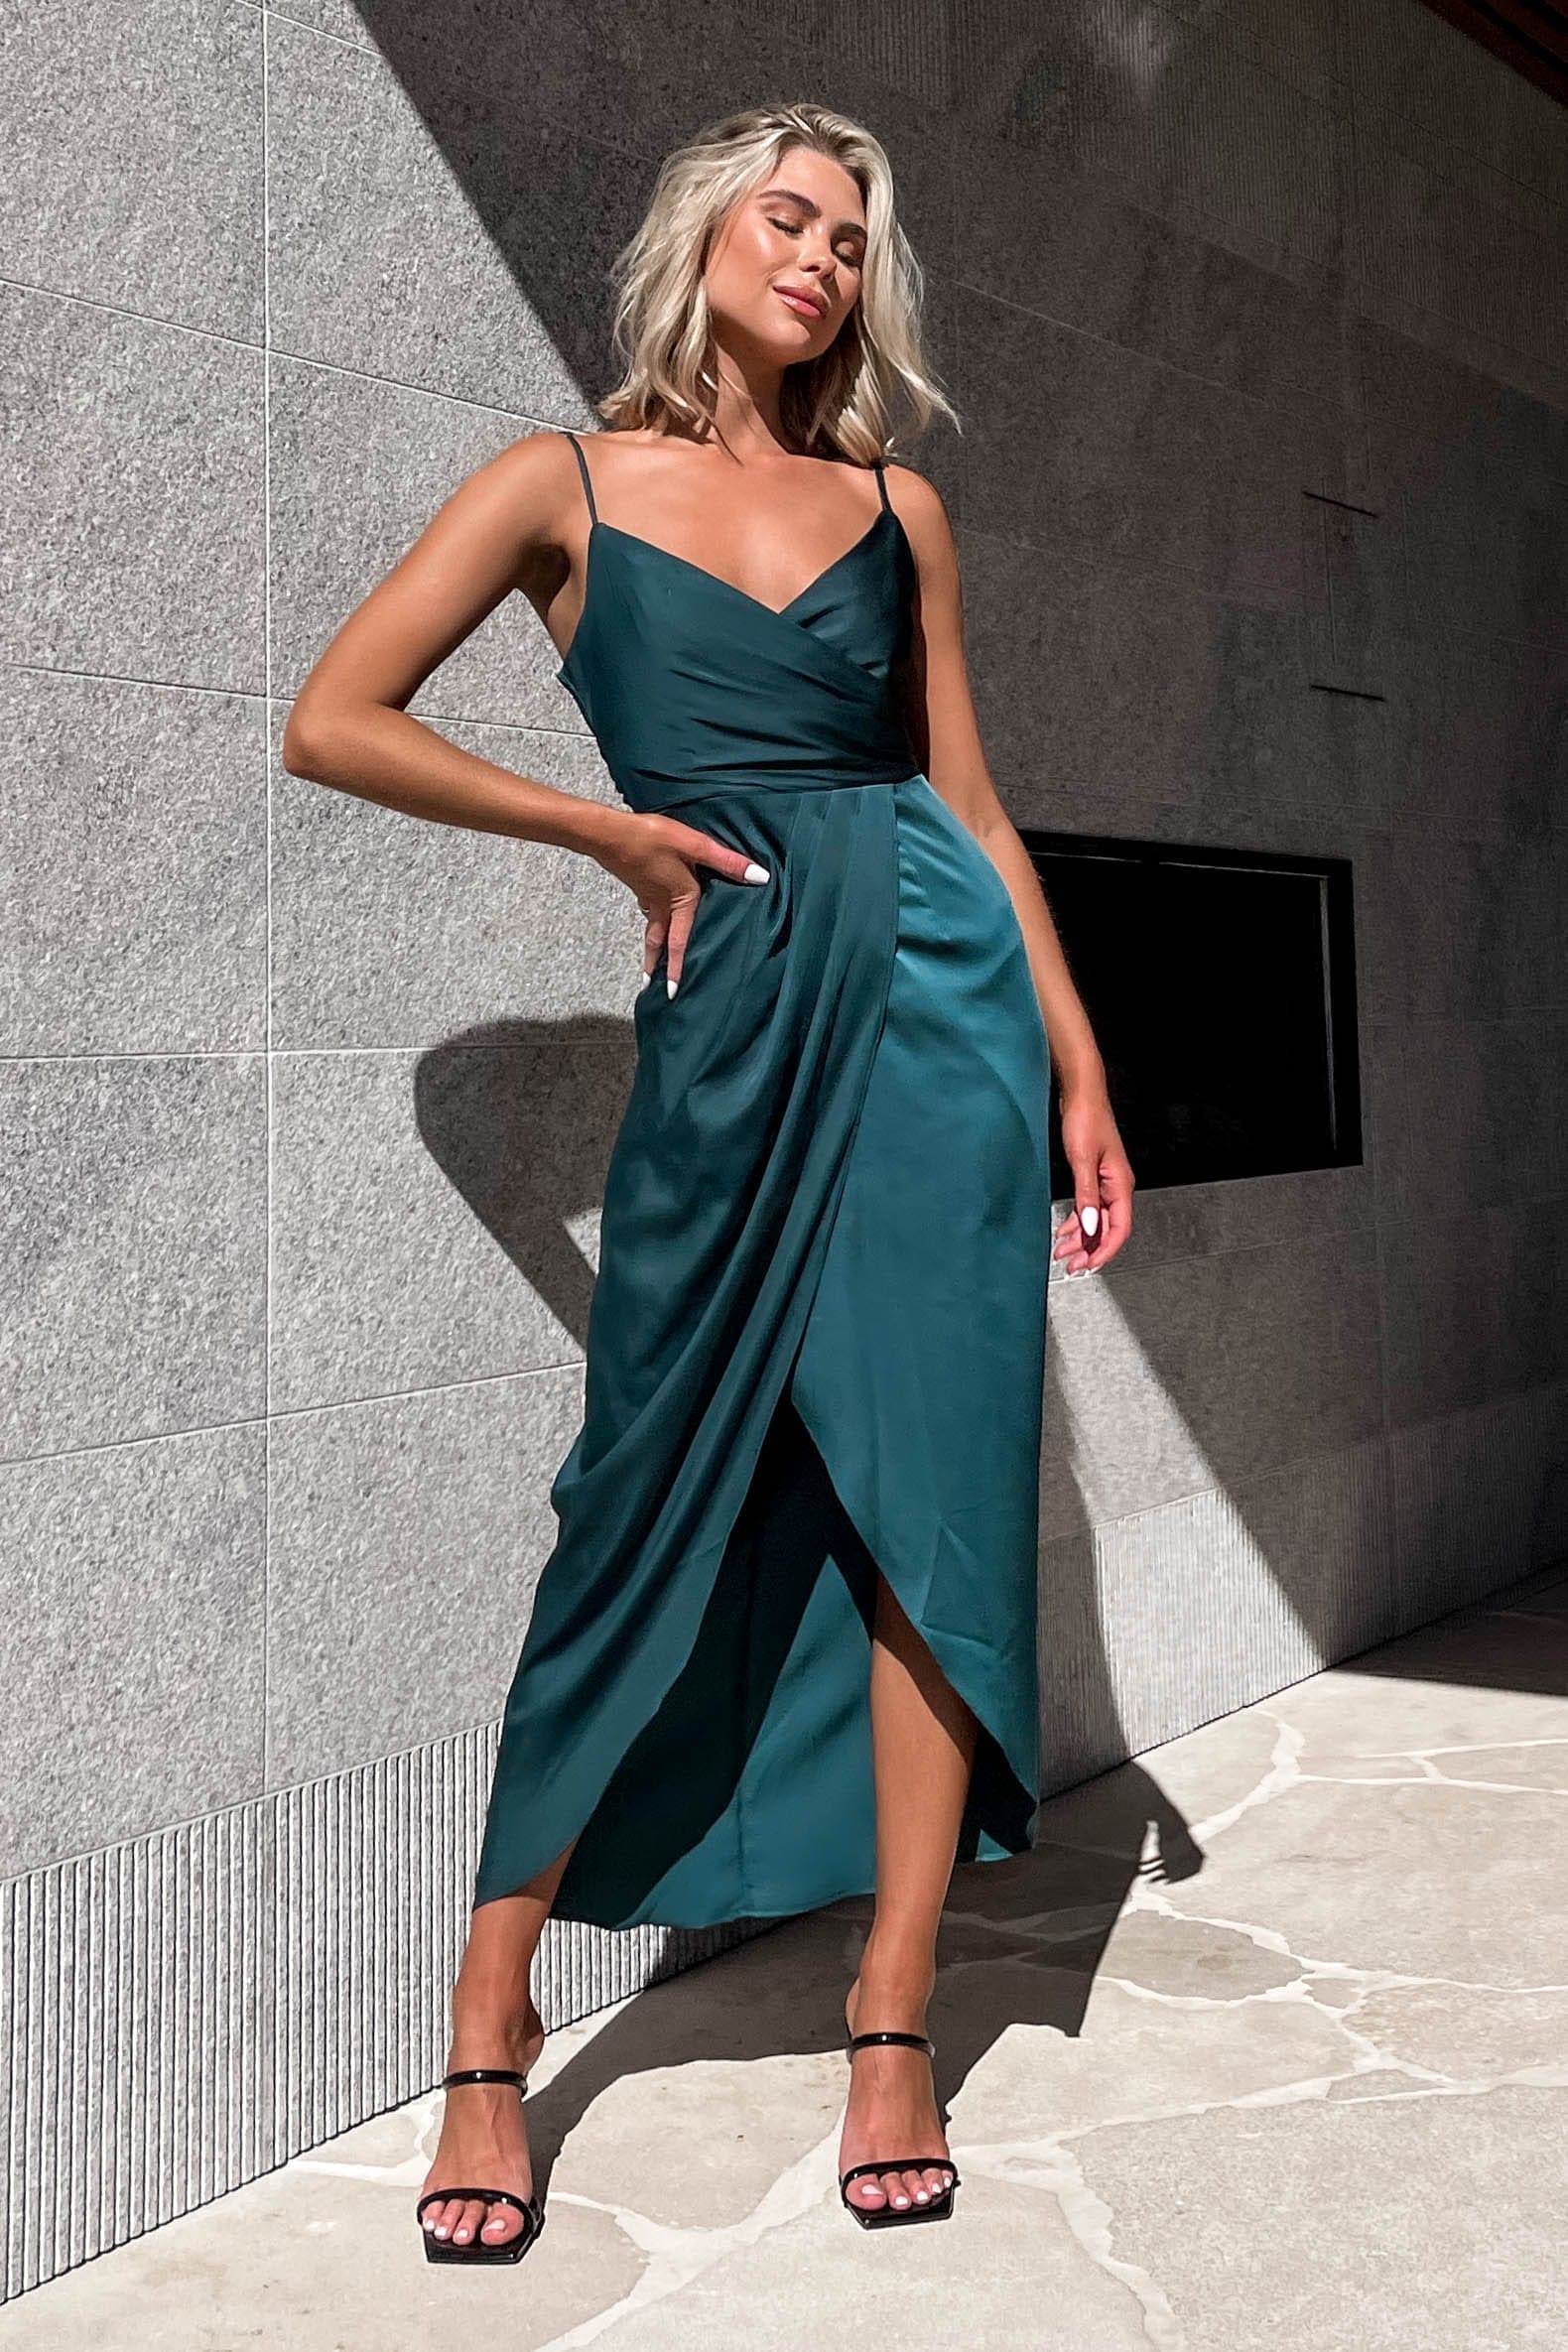 Yessica Dress, DRESS, DRESSES, GREEN, MIDI DRESS, new arrivals, POLYESTER & SPANDEX, POLYESTER AND SPANDEX, SPANDEX AND POLYESTER, WAIST TIE, , -MISHKAH